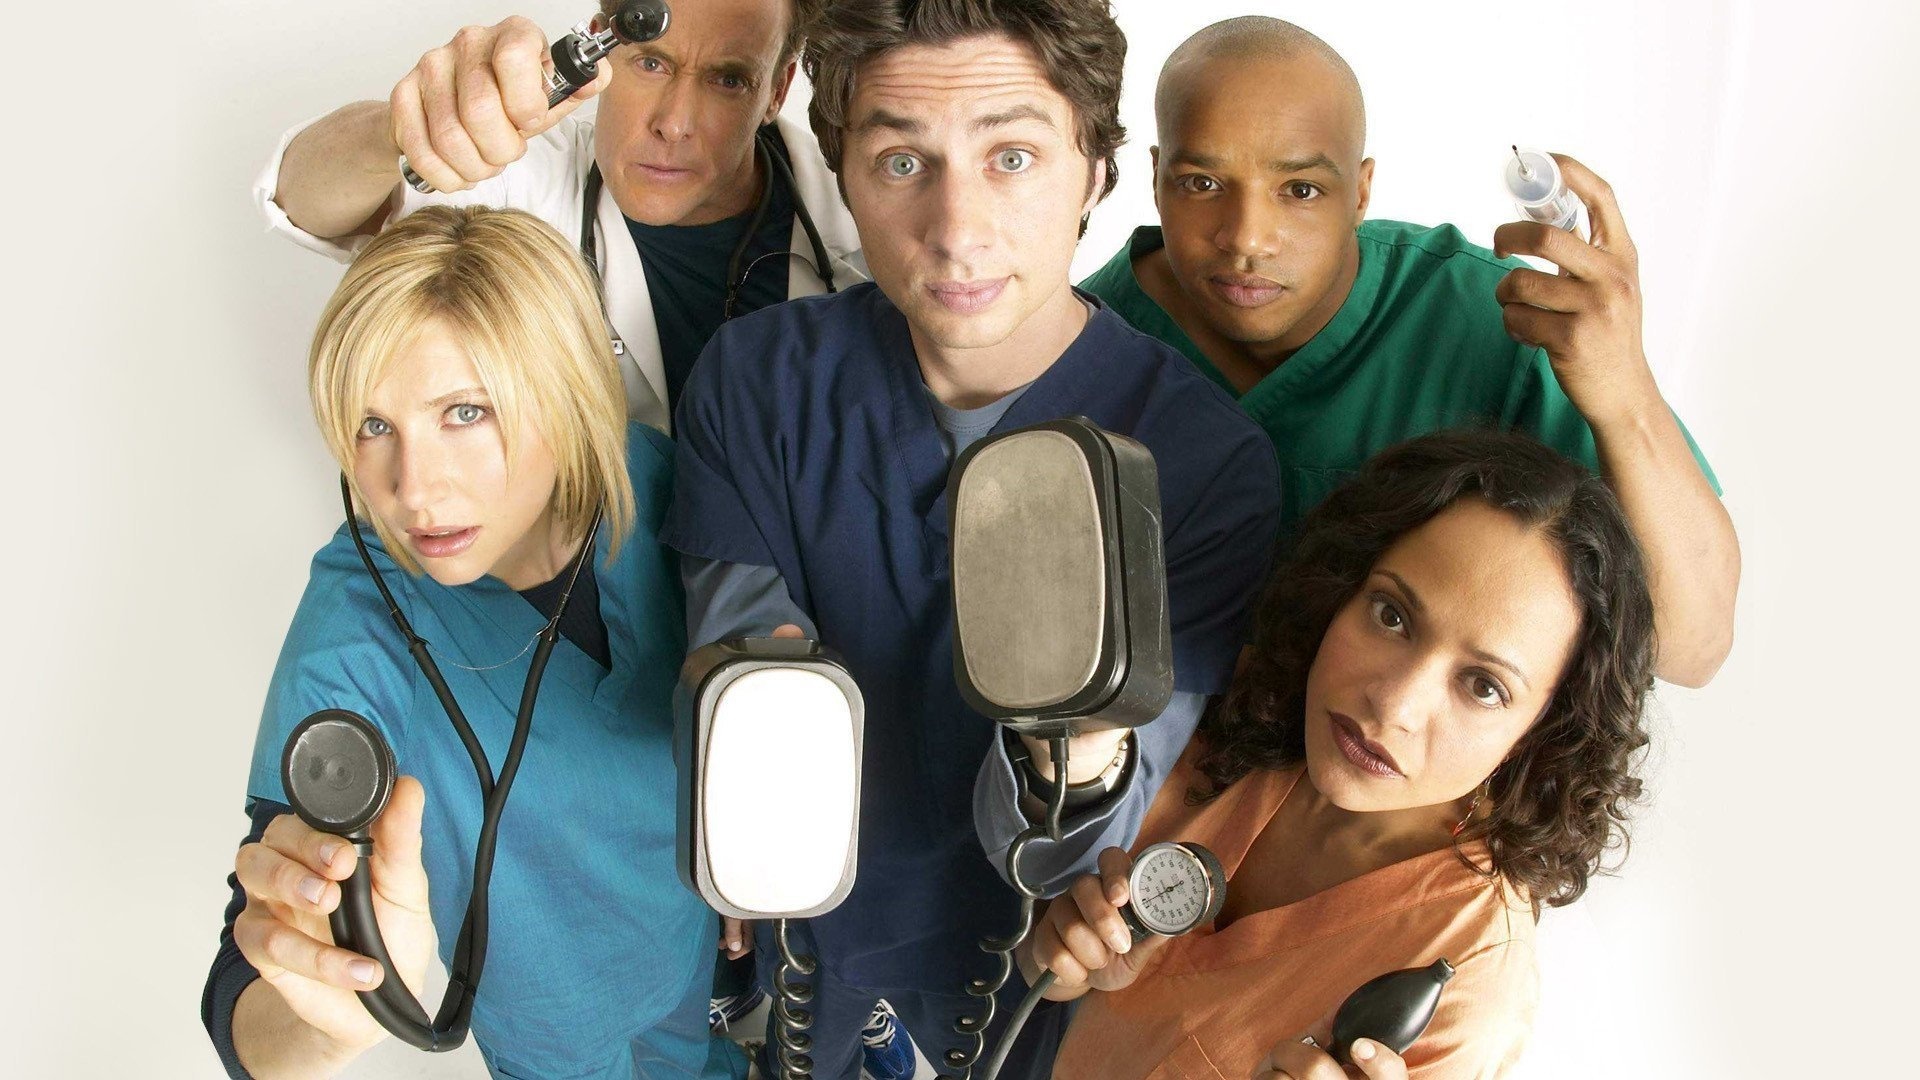 Scrubs (TV Series): The show follows the lives of employees at the fictional Sacred Heart Hospital, which is a teaching hospital. 1920x1080 Full HD Background.